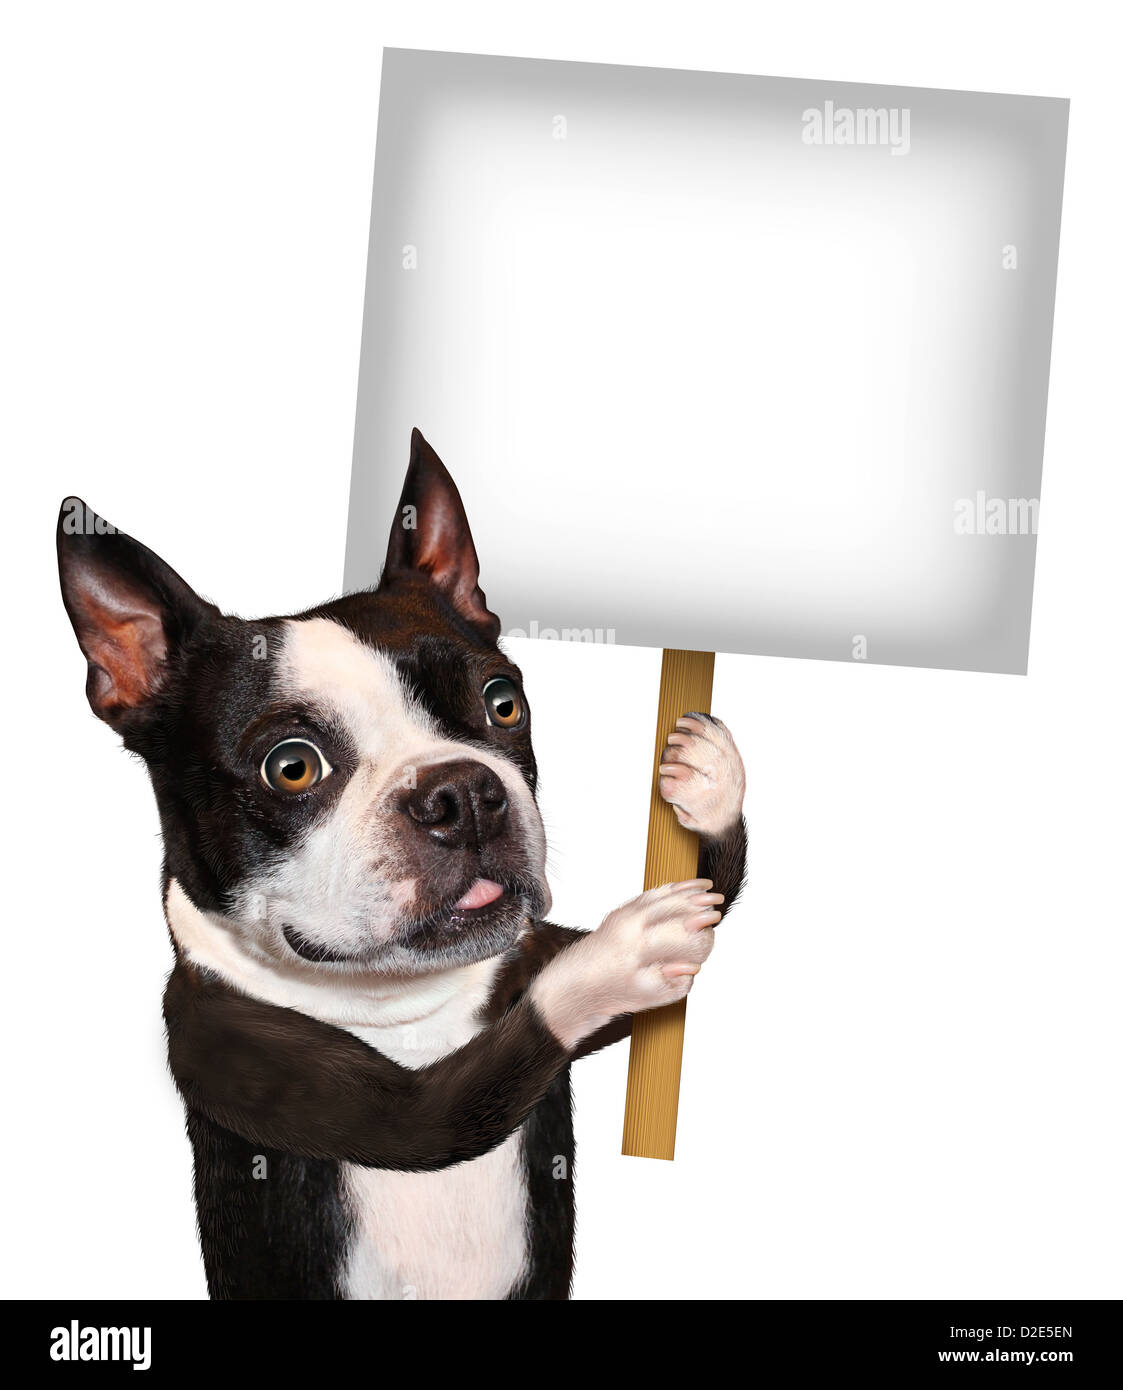 Dog holding a blank sign as a Boston Terrier with a smiling happy expression advertising and communicating a message pertaining Stock Photo